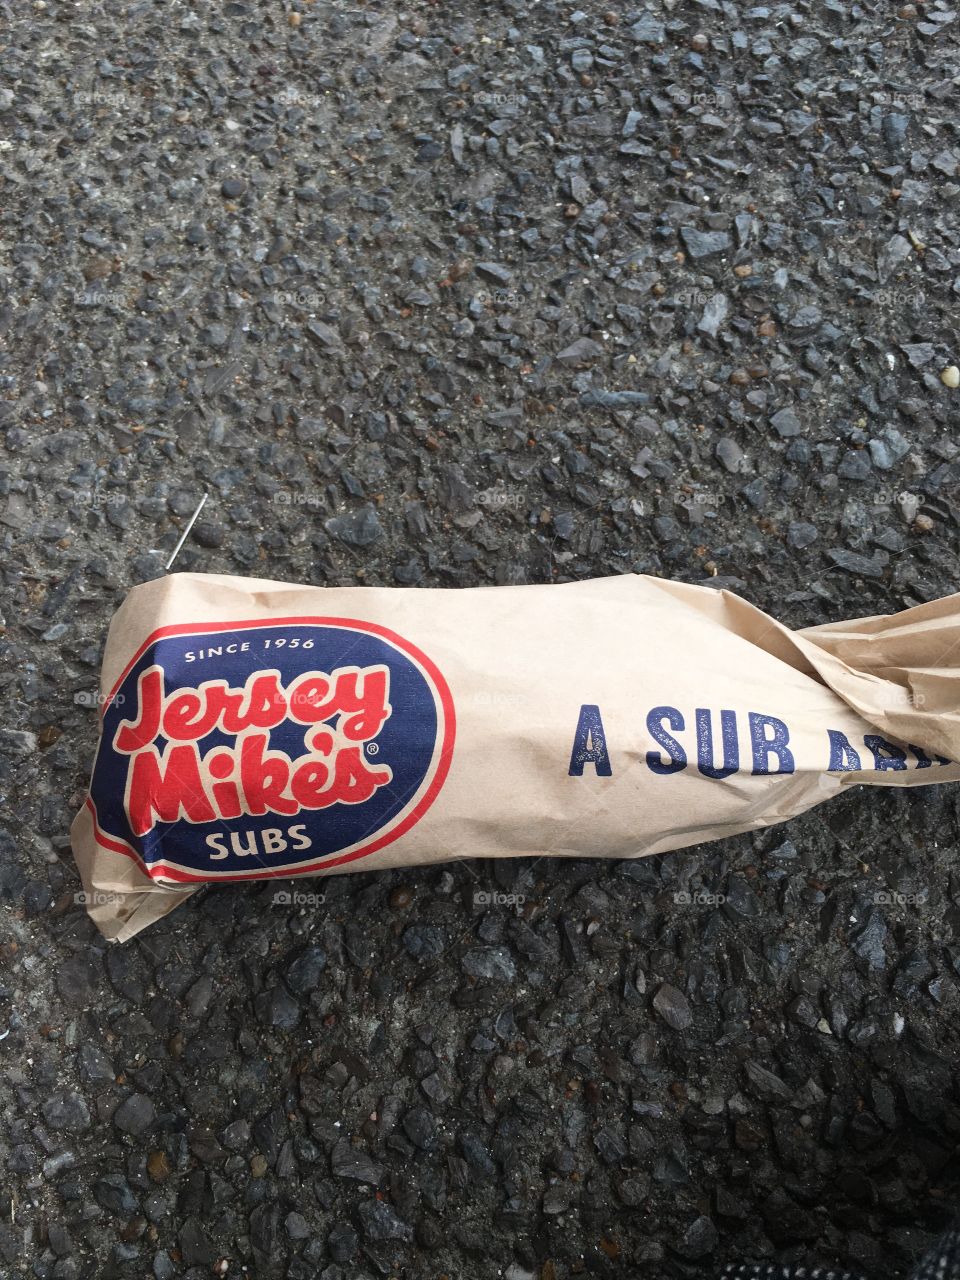 Jersey mike's sub.